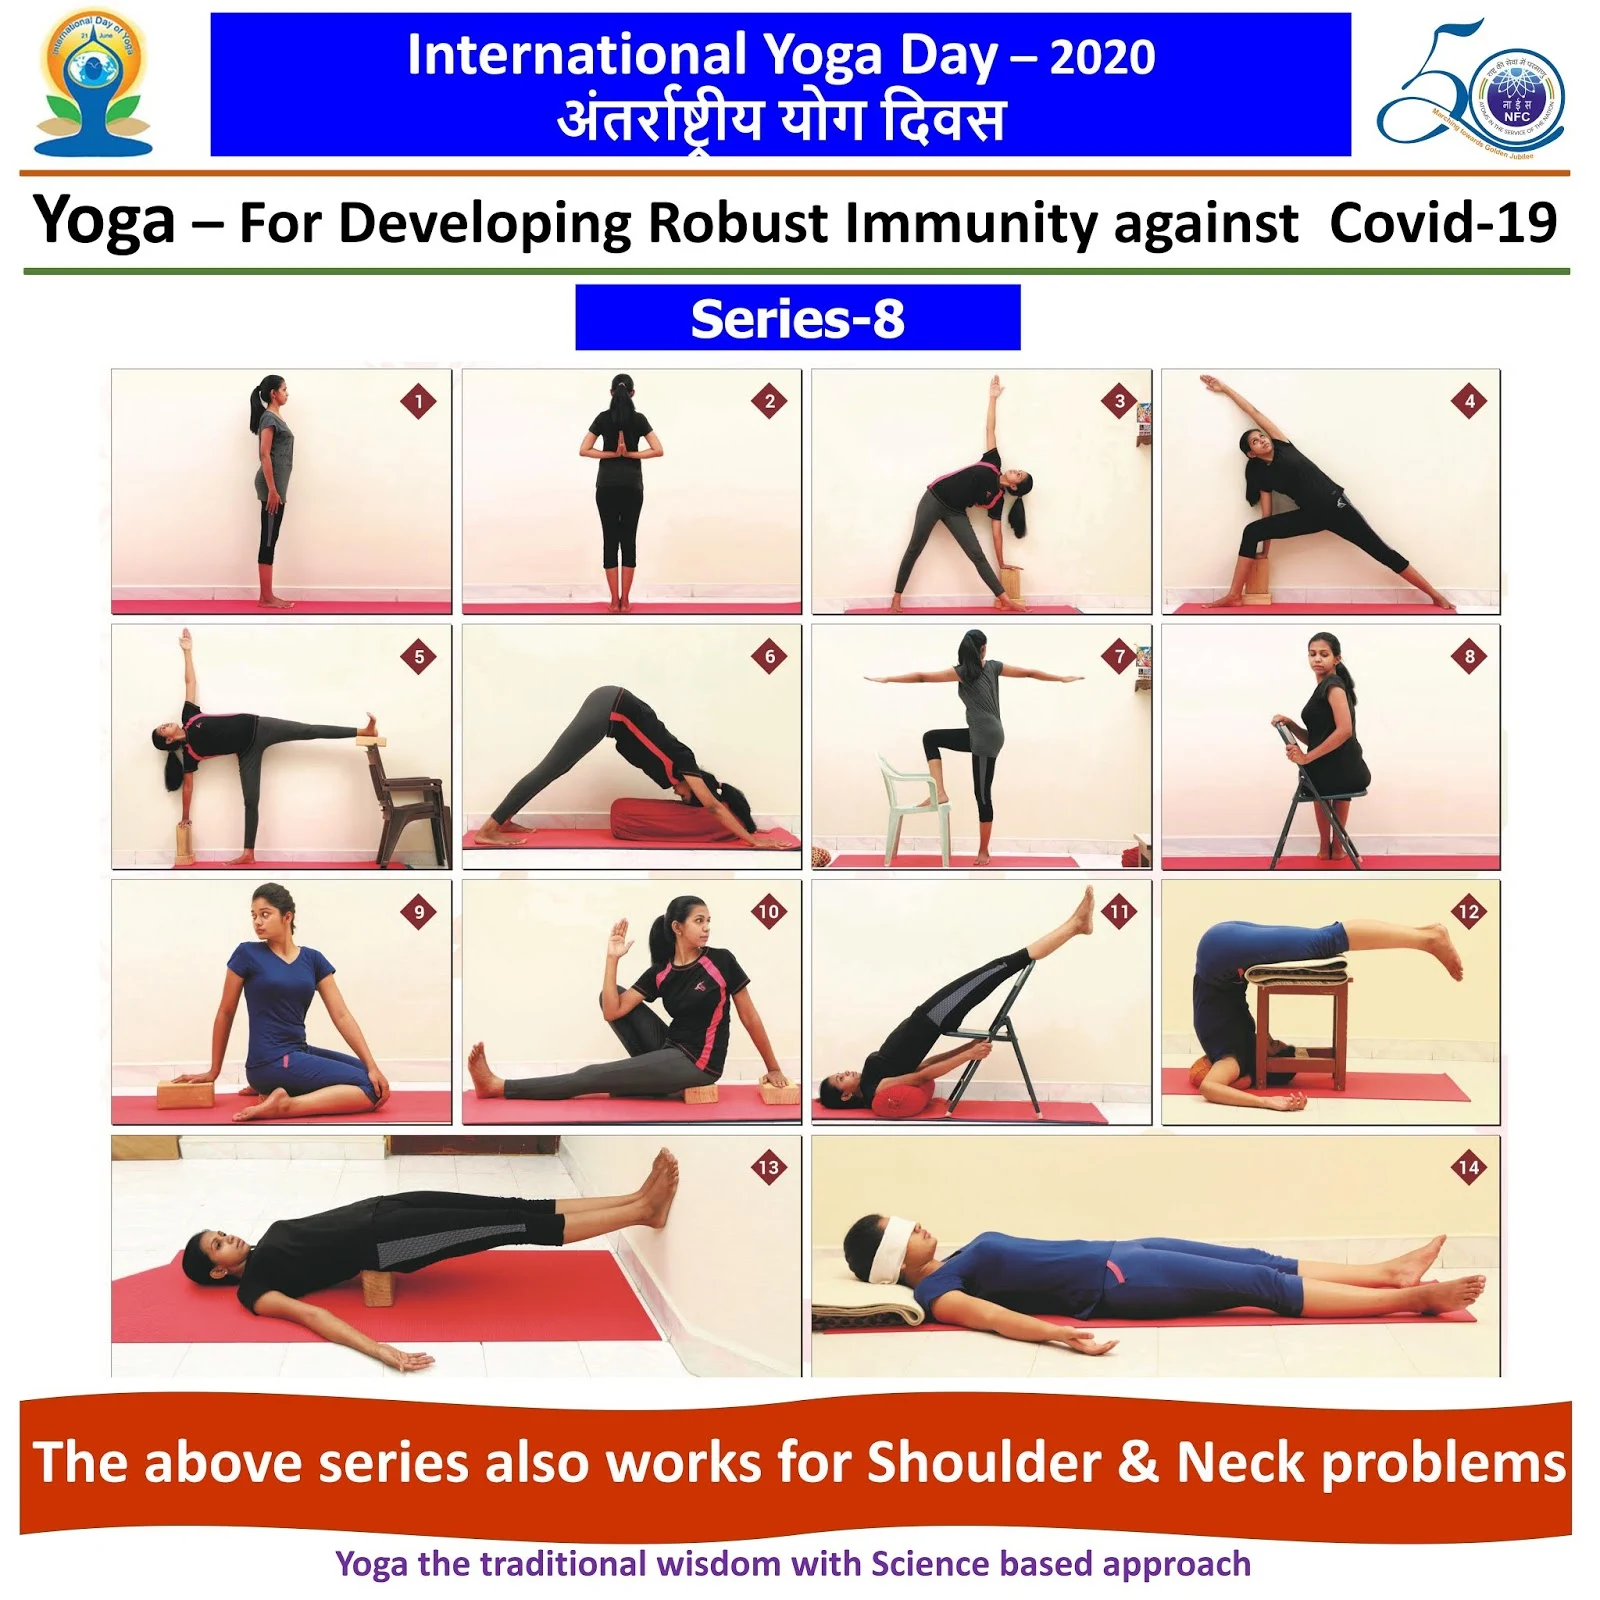 Happy International Yoga Day ... This series also works for Shoulder & Neck Problems